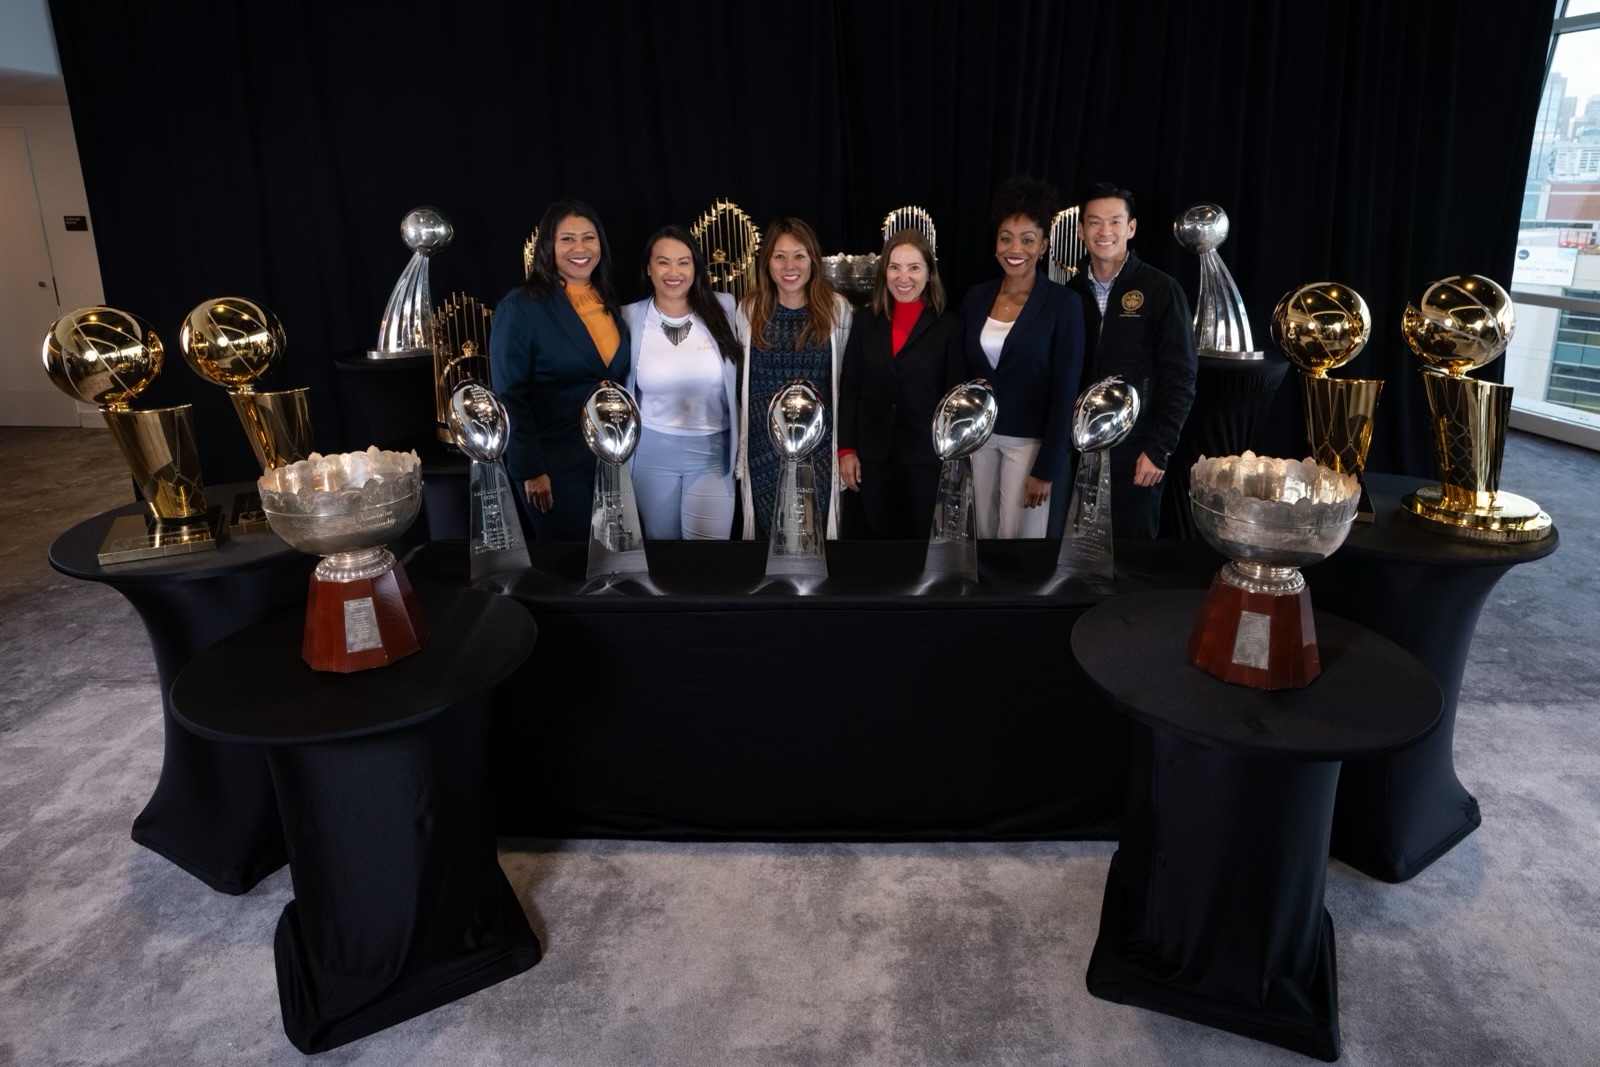 Image of Elected Officials with Professional Sports Trophies 